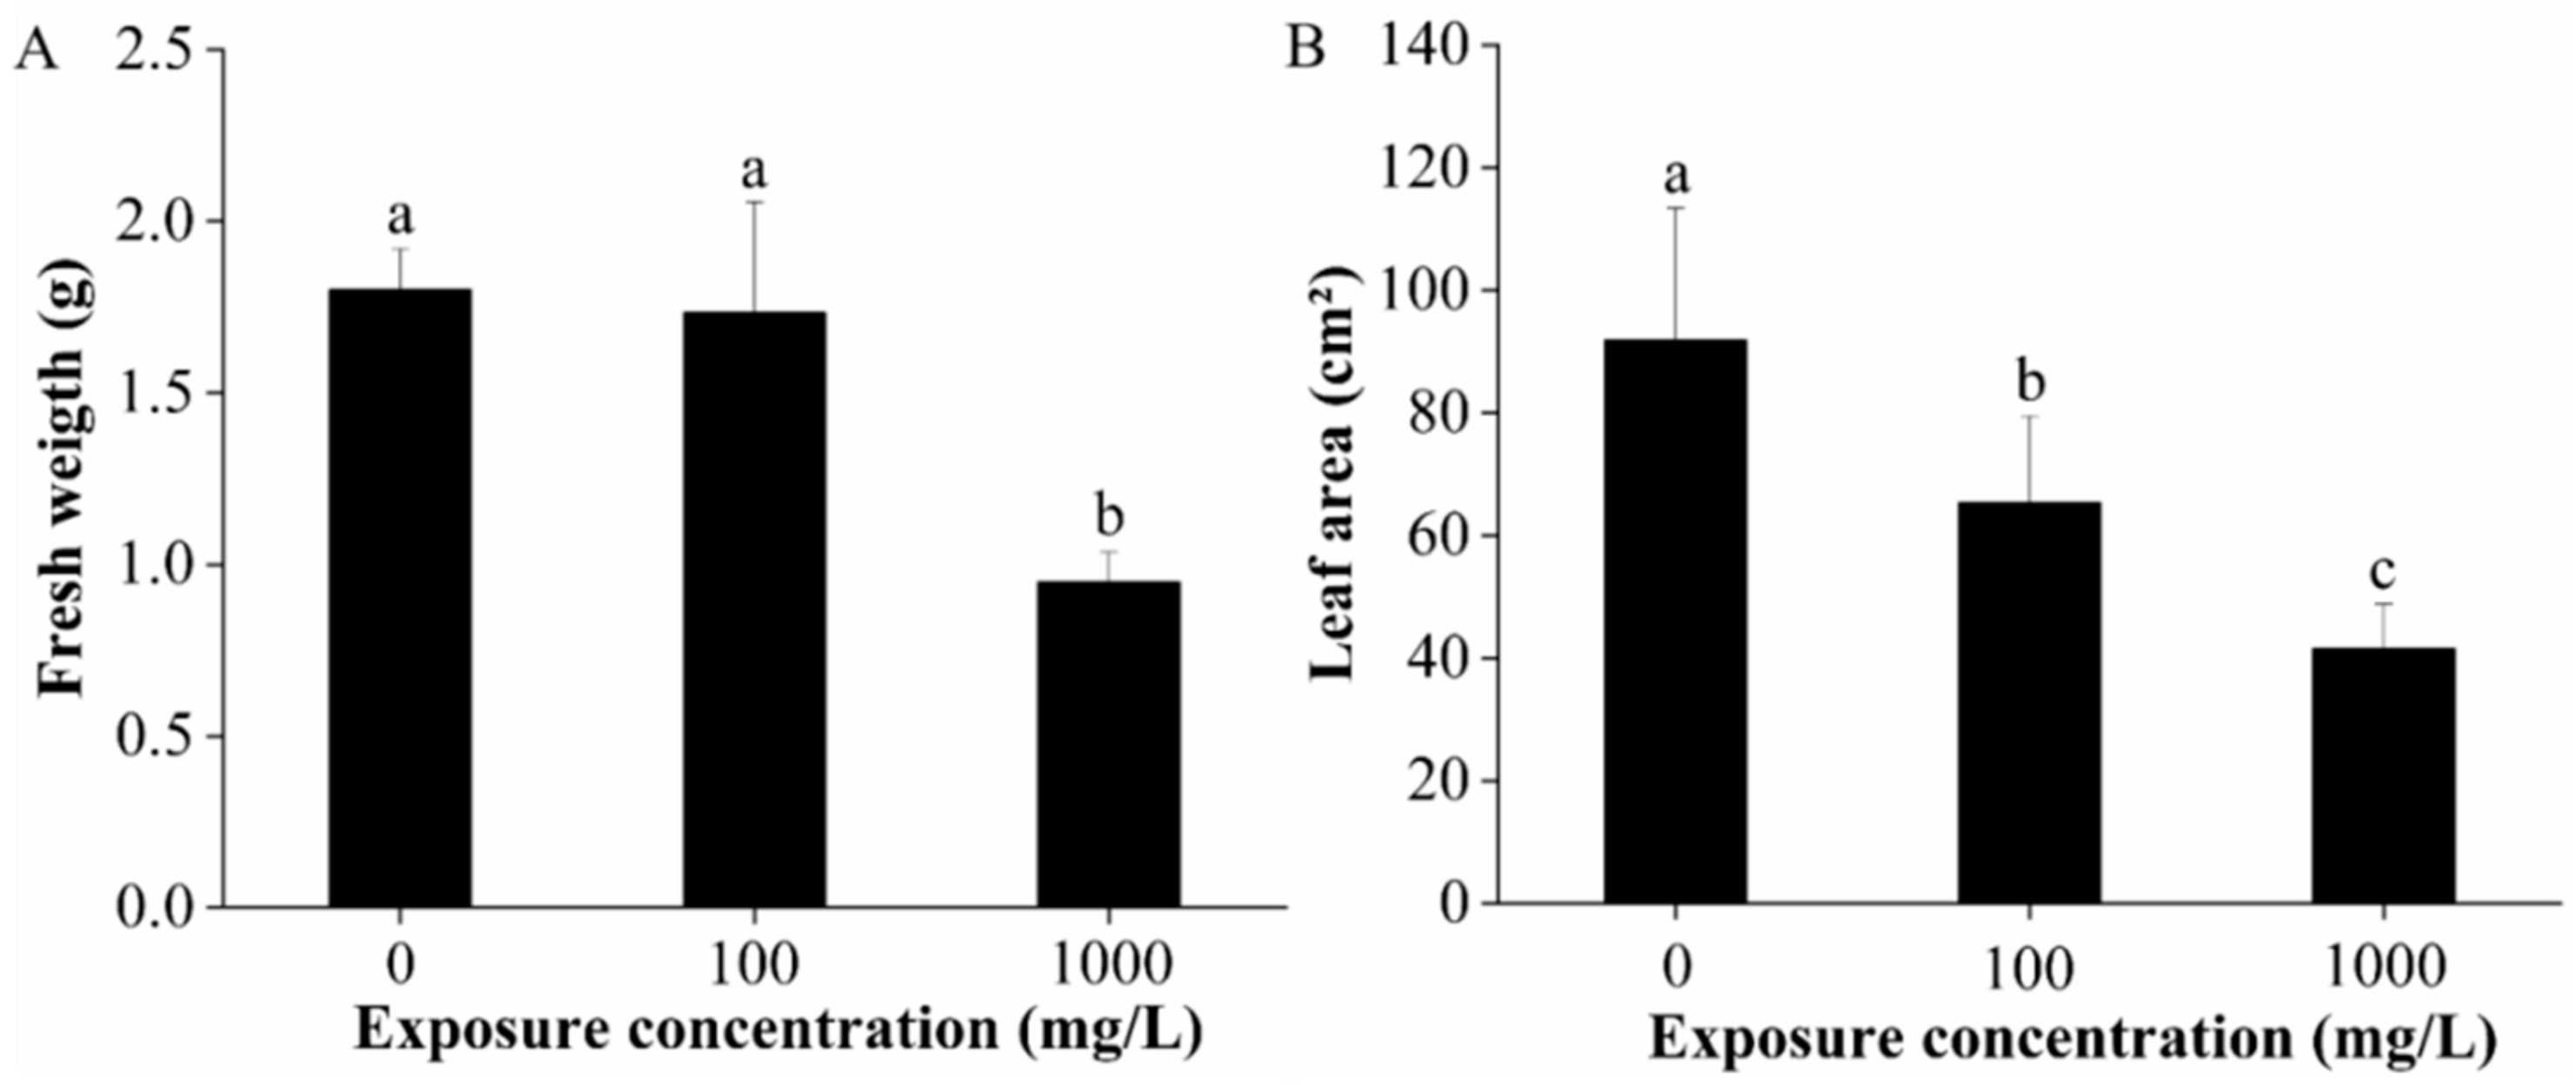 IJMS | Free Full-Text | Dose-Dependent Physiological and Transcriptomic  Responses of Lettuce (Lactuca sativa L.) to Copper Oxide  Nanoparticles—Insights into the Phytotoxicity Mechanisms